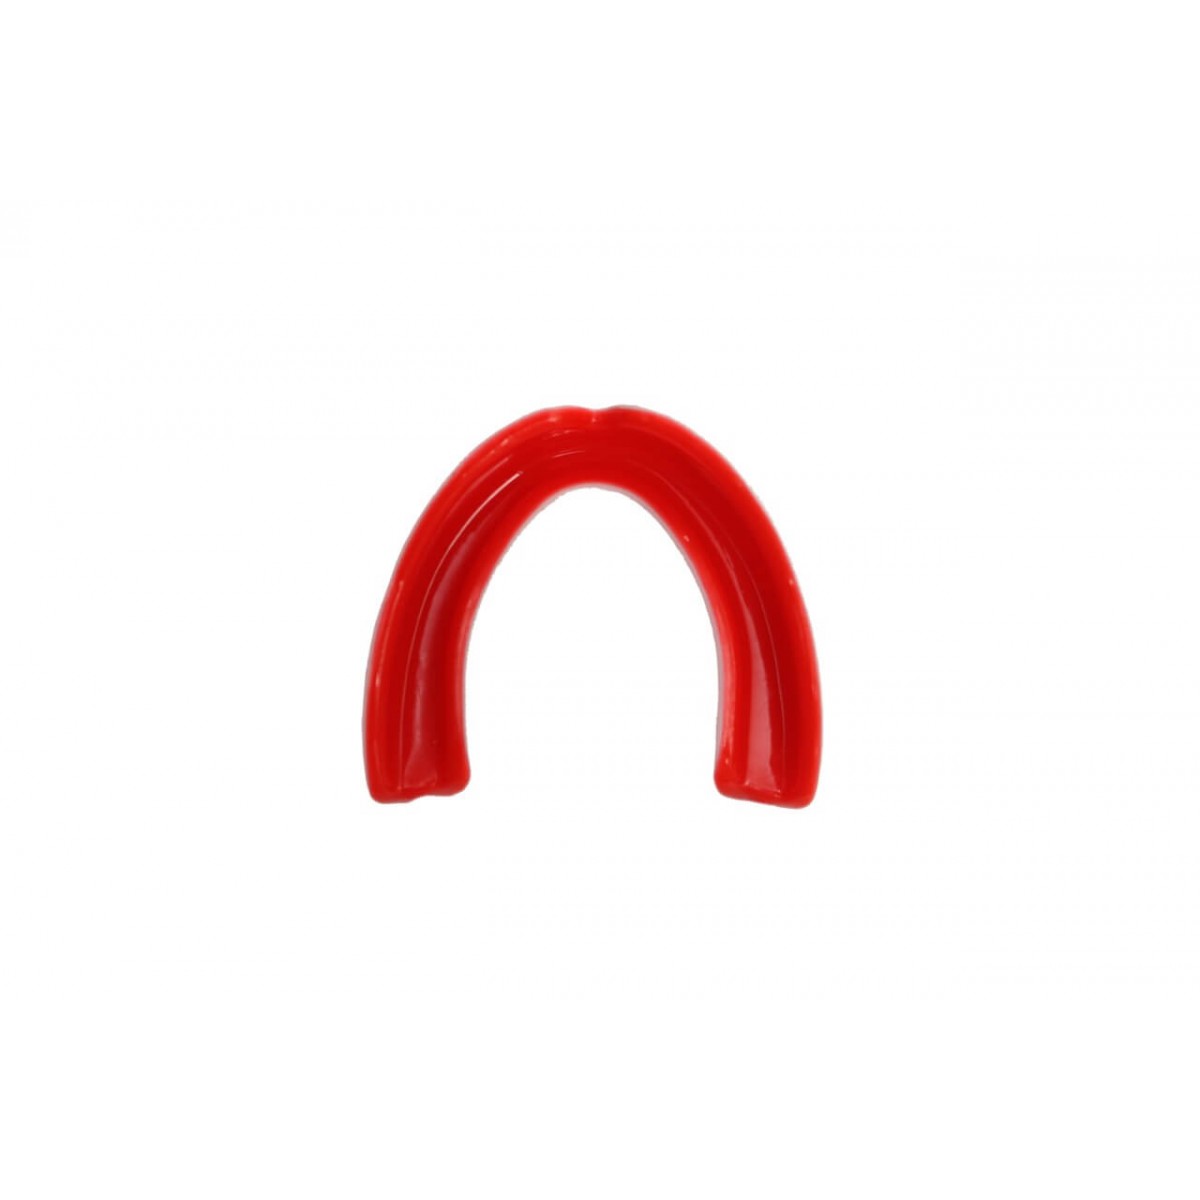 MALINO PREMIUM ADULT MOUTH GUARD TEETH PROTECTOR WHITE-RED